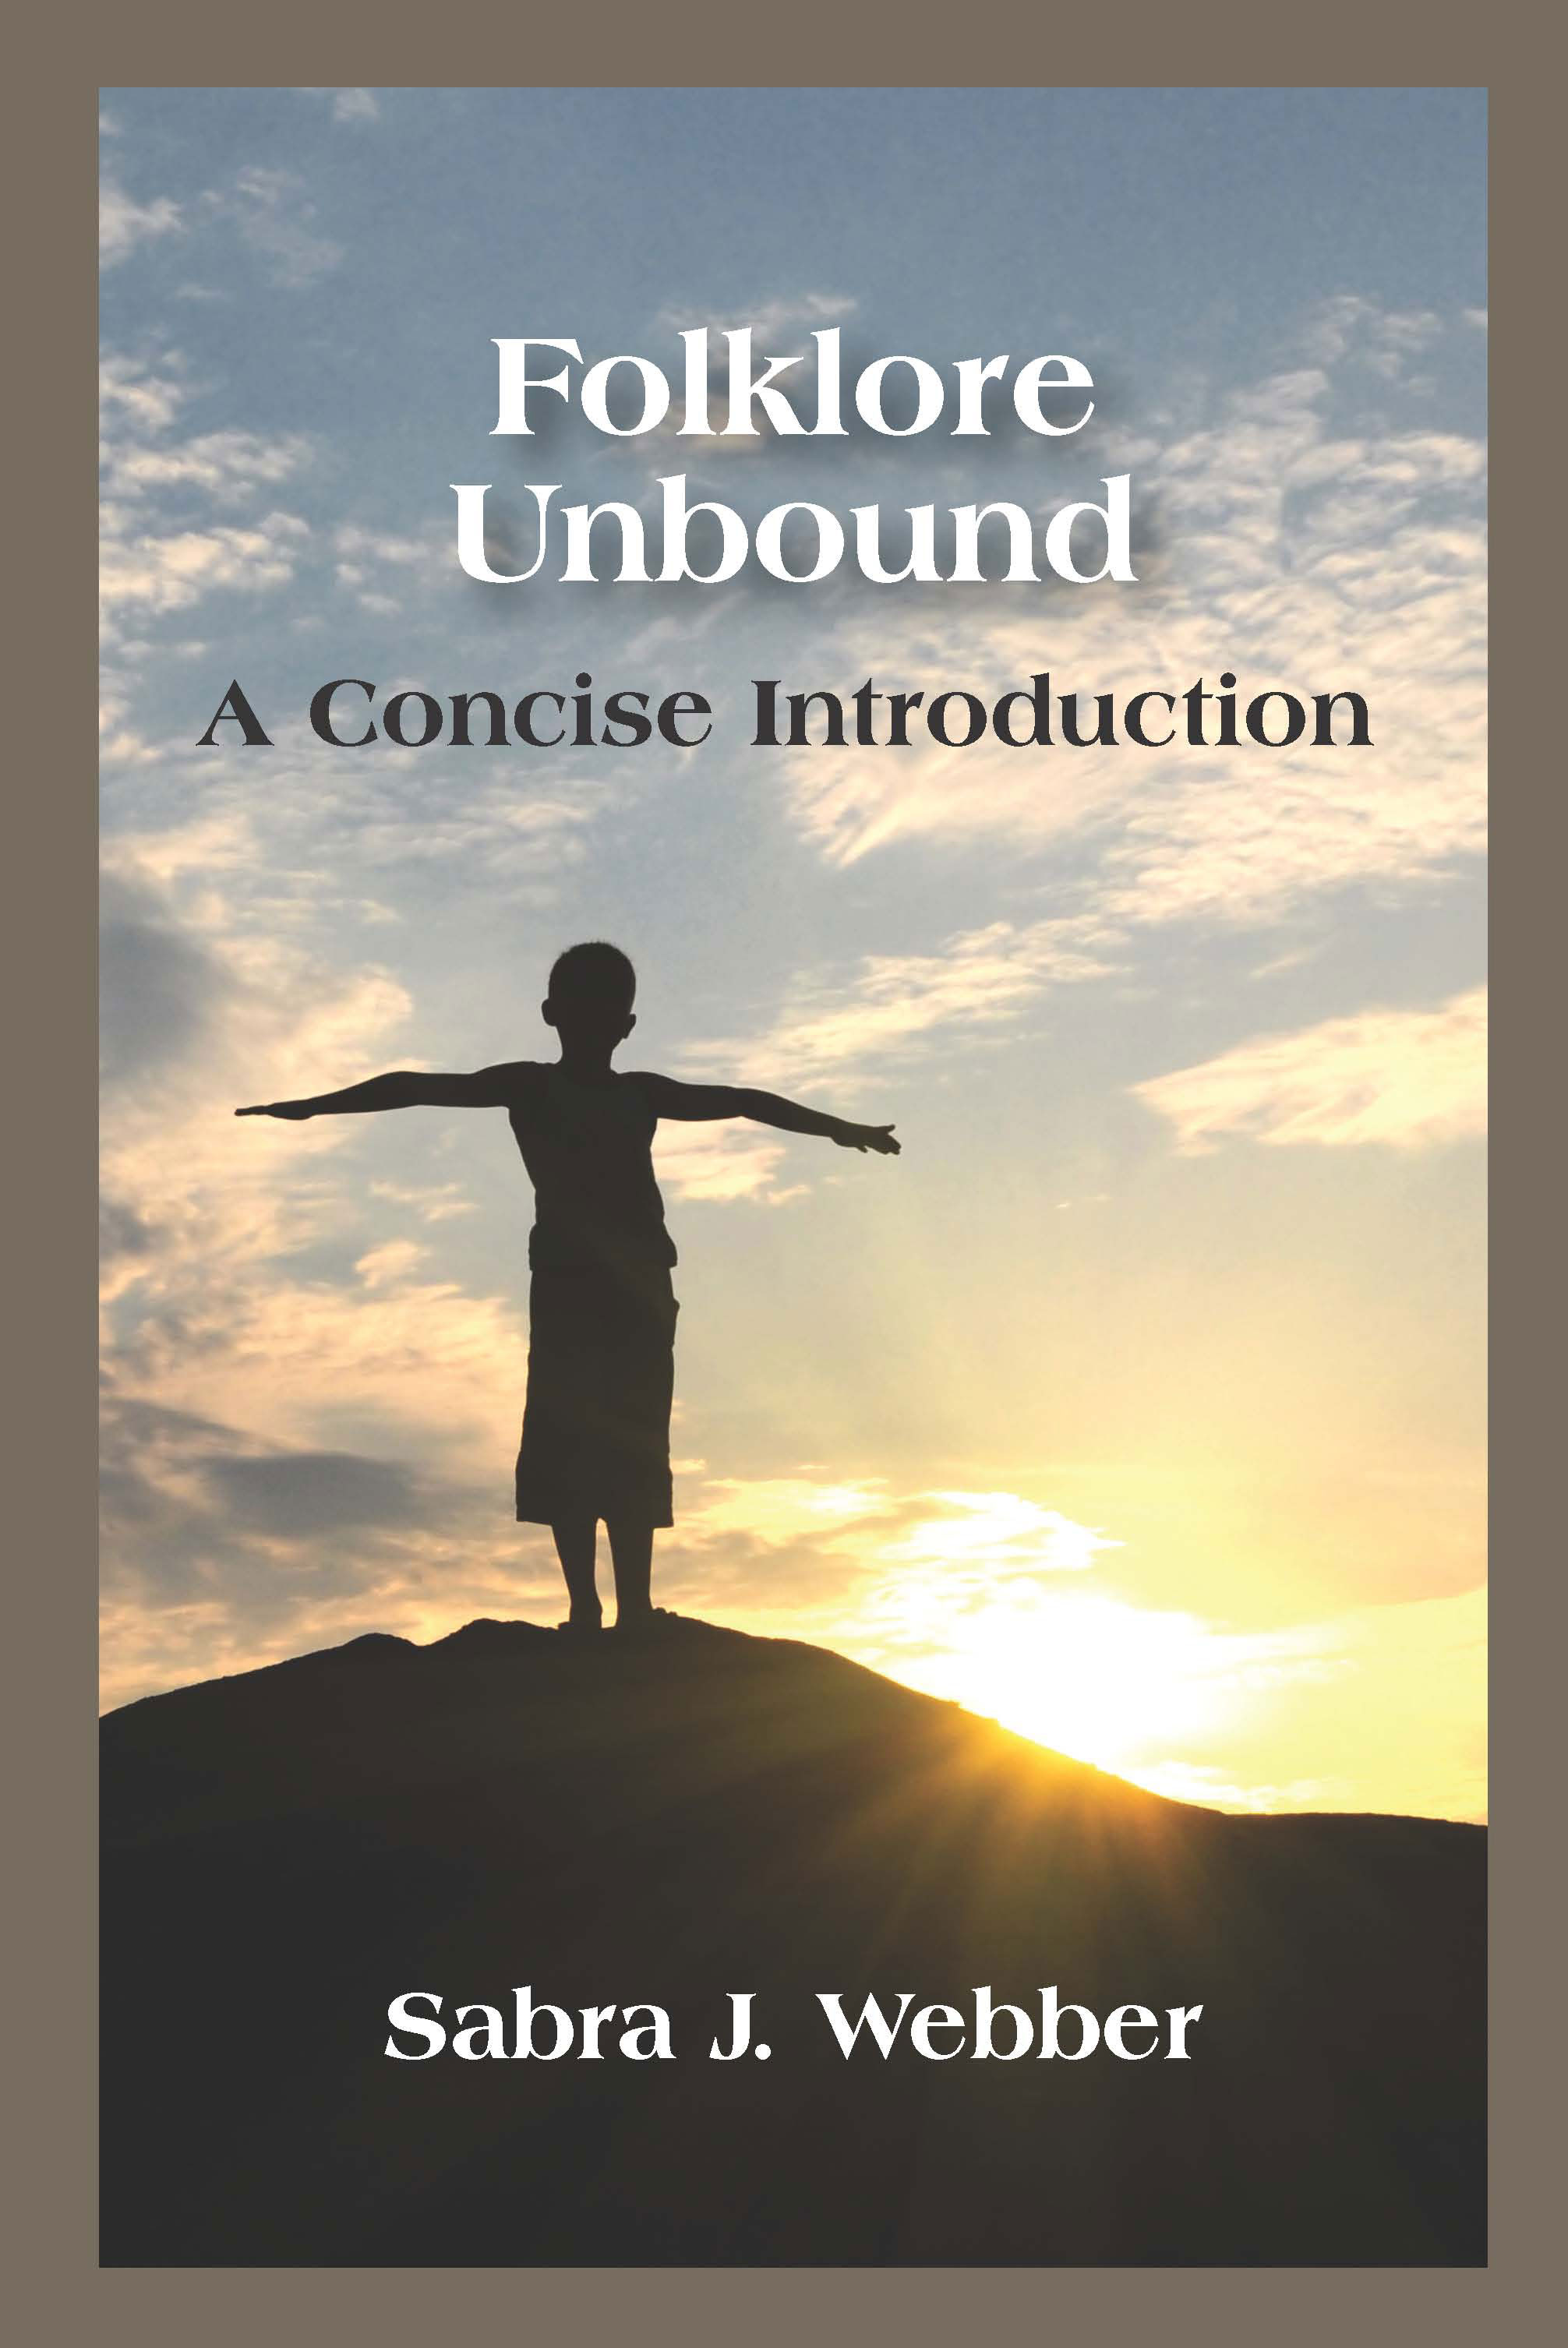 Folklore Unbound: A Concise Introduction by Sabra J. Webber